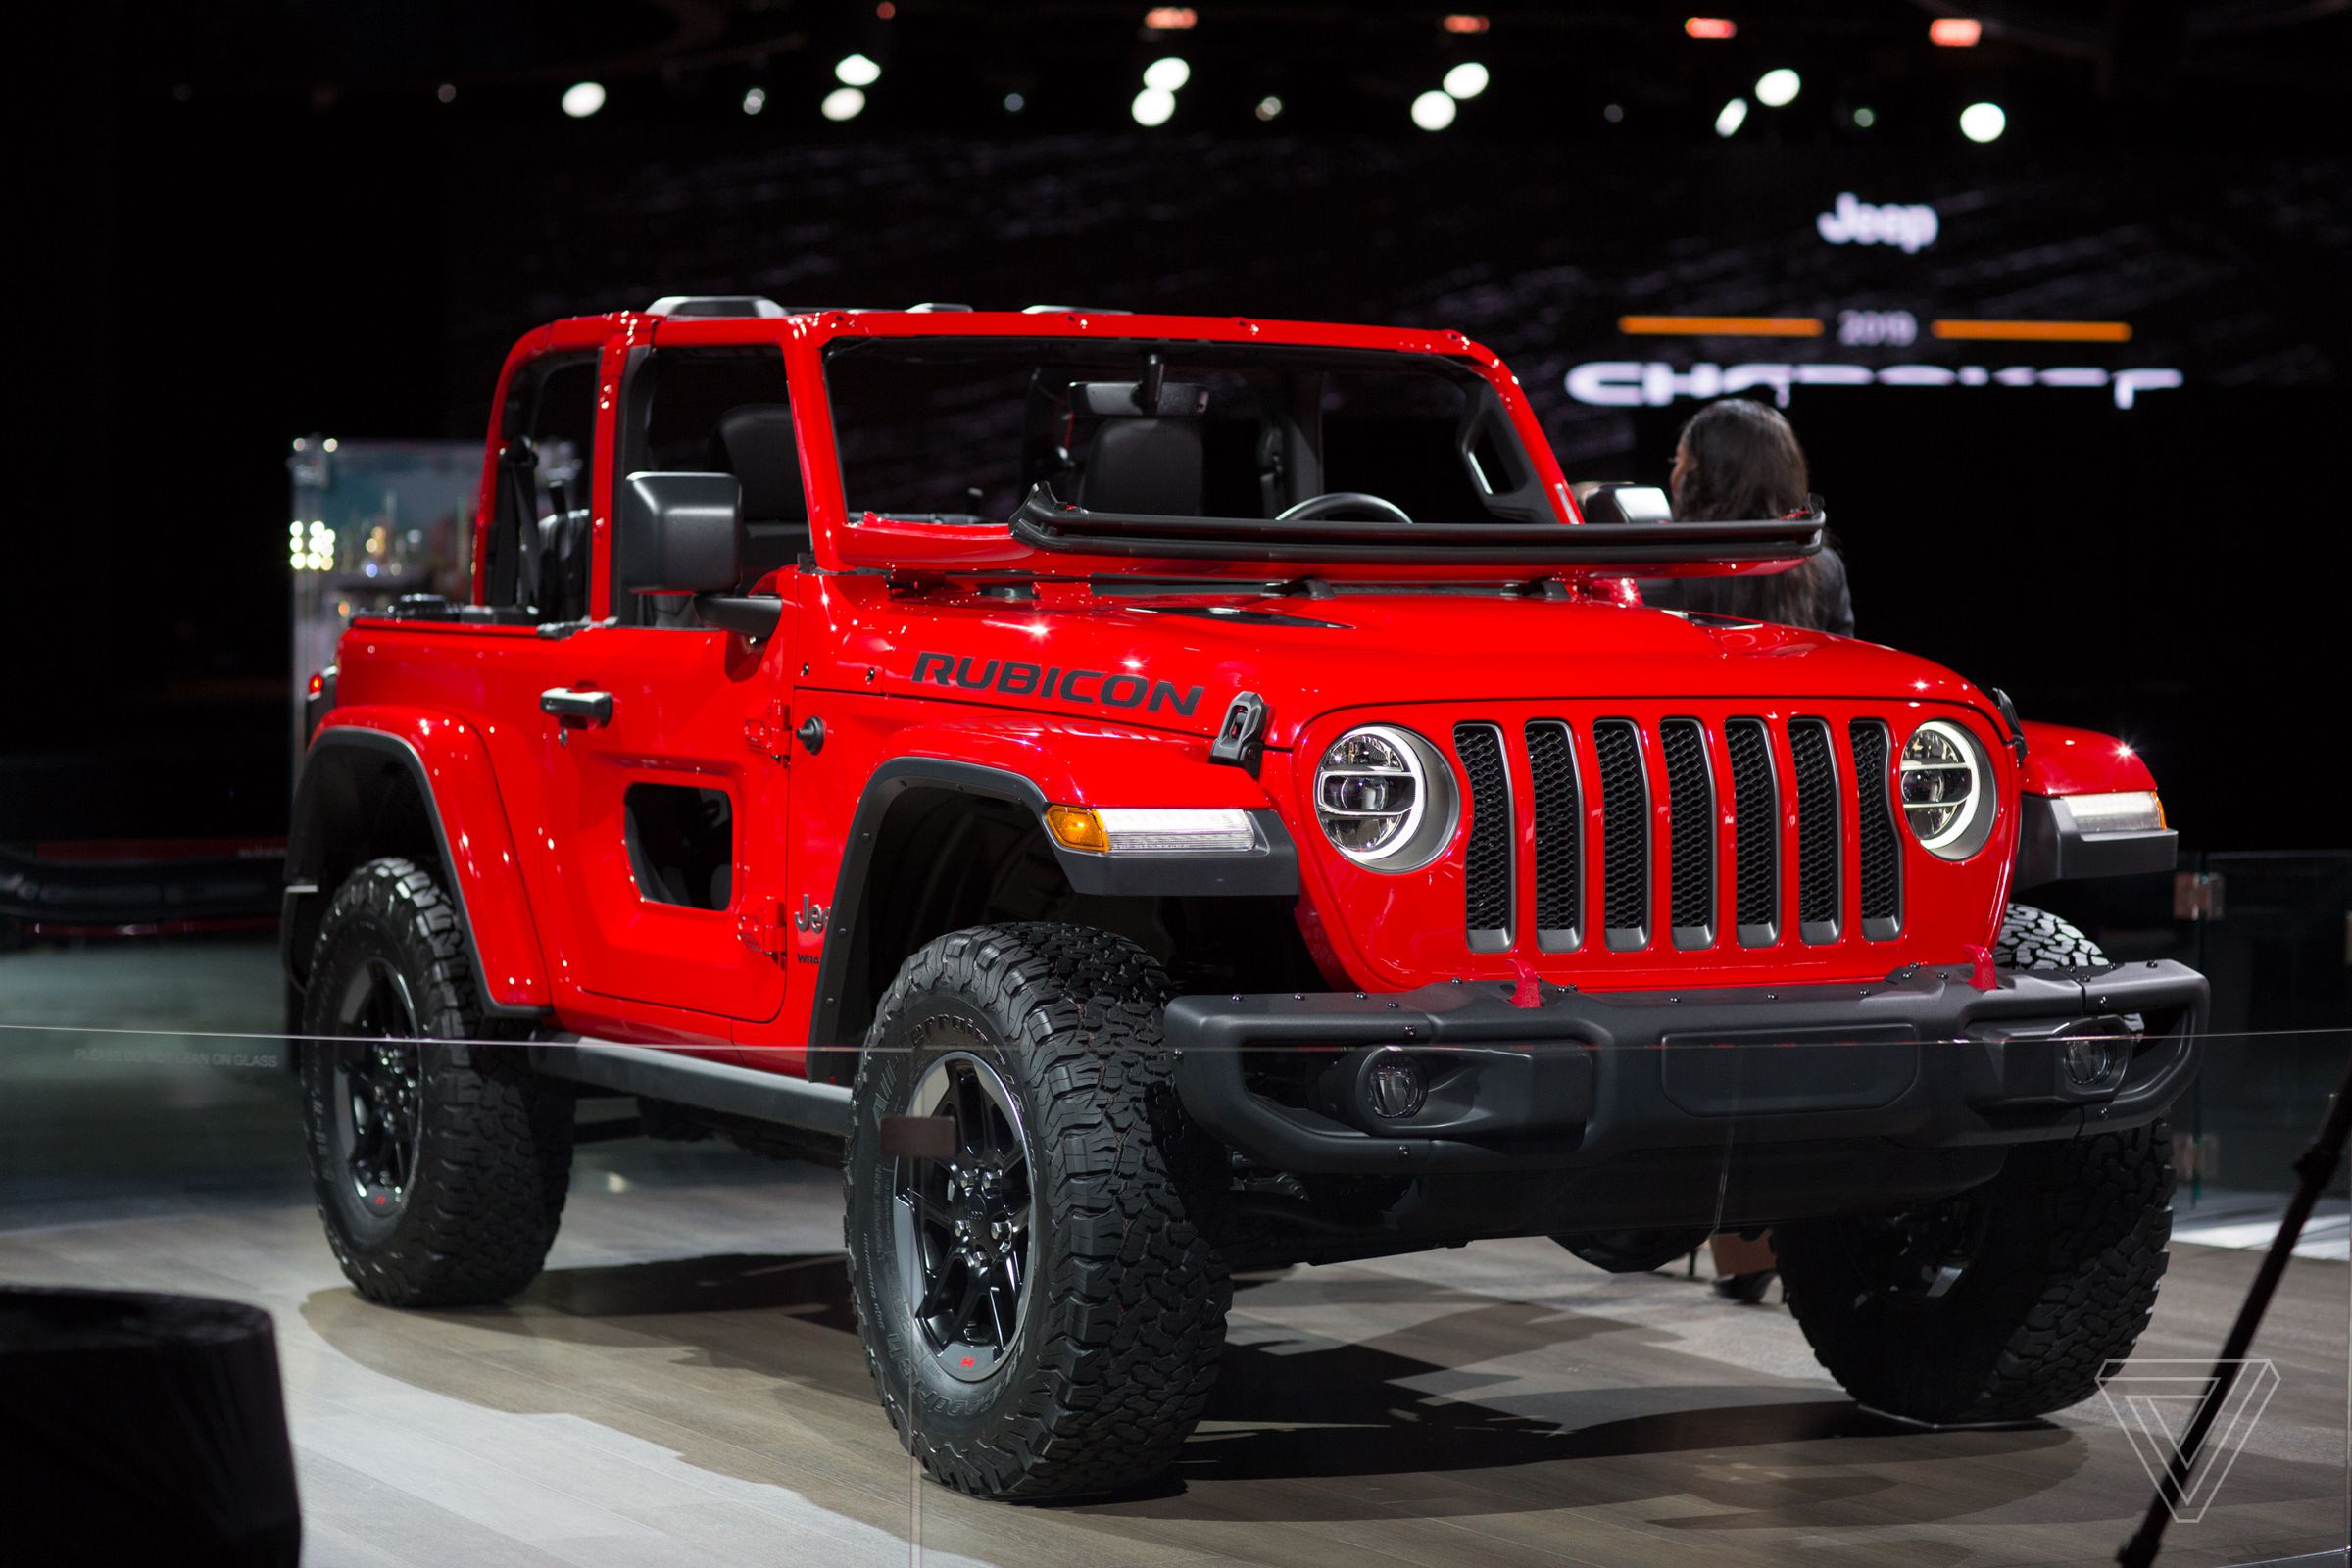 The recently announced Jeep Wrangler update had a front-row spot at the FCA booth.